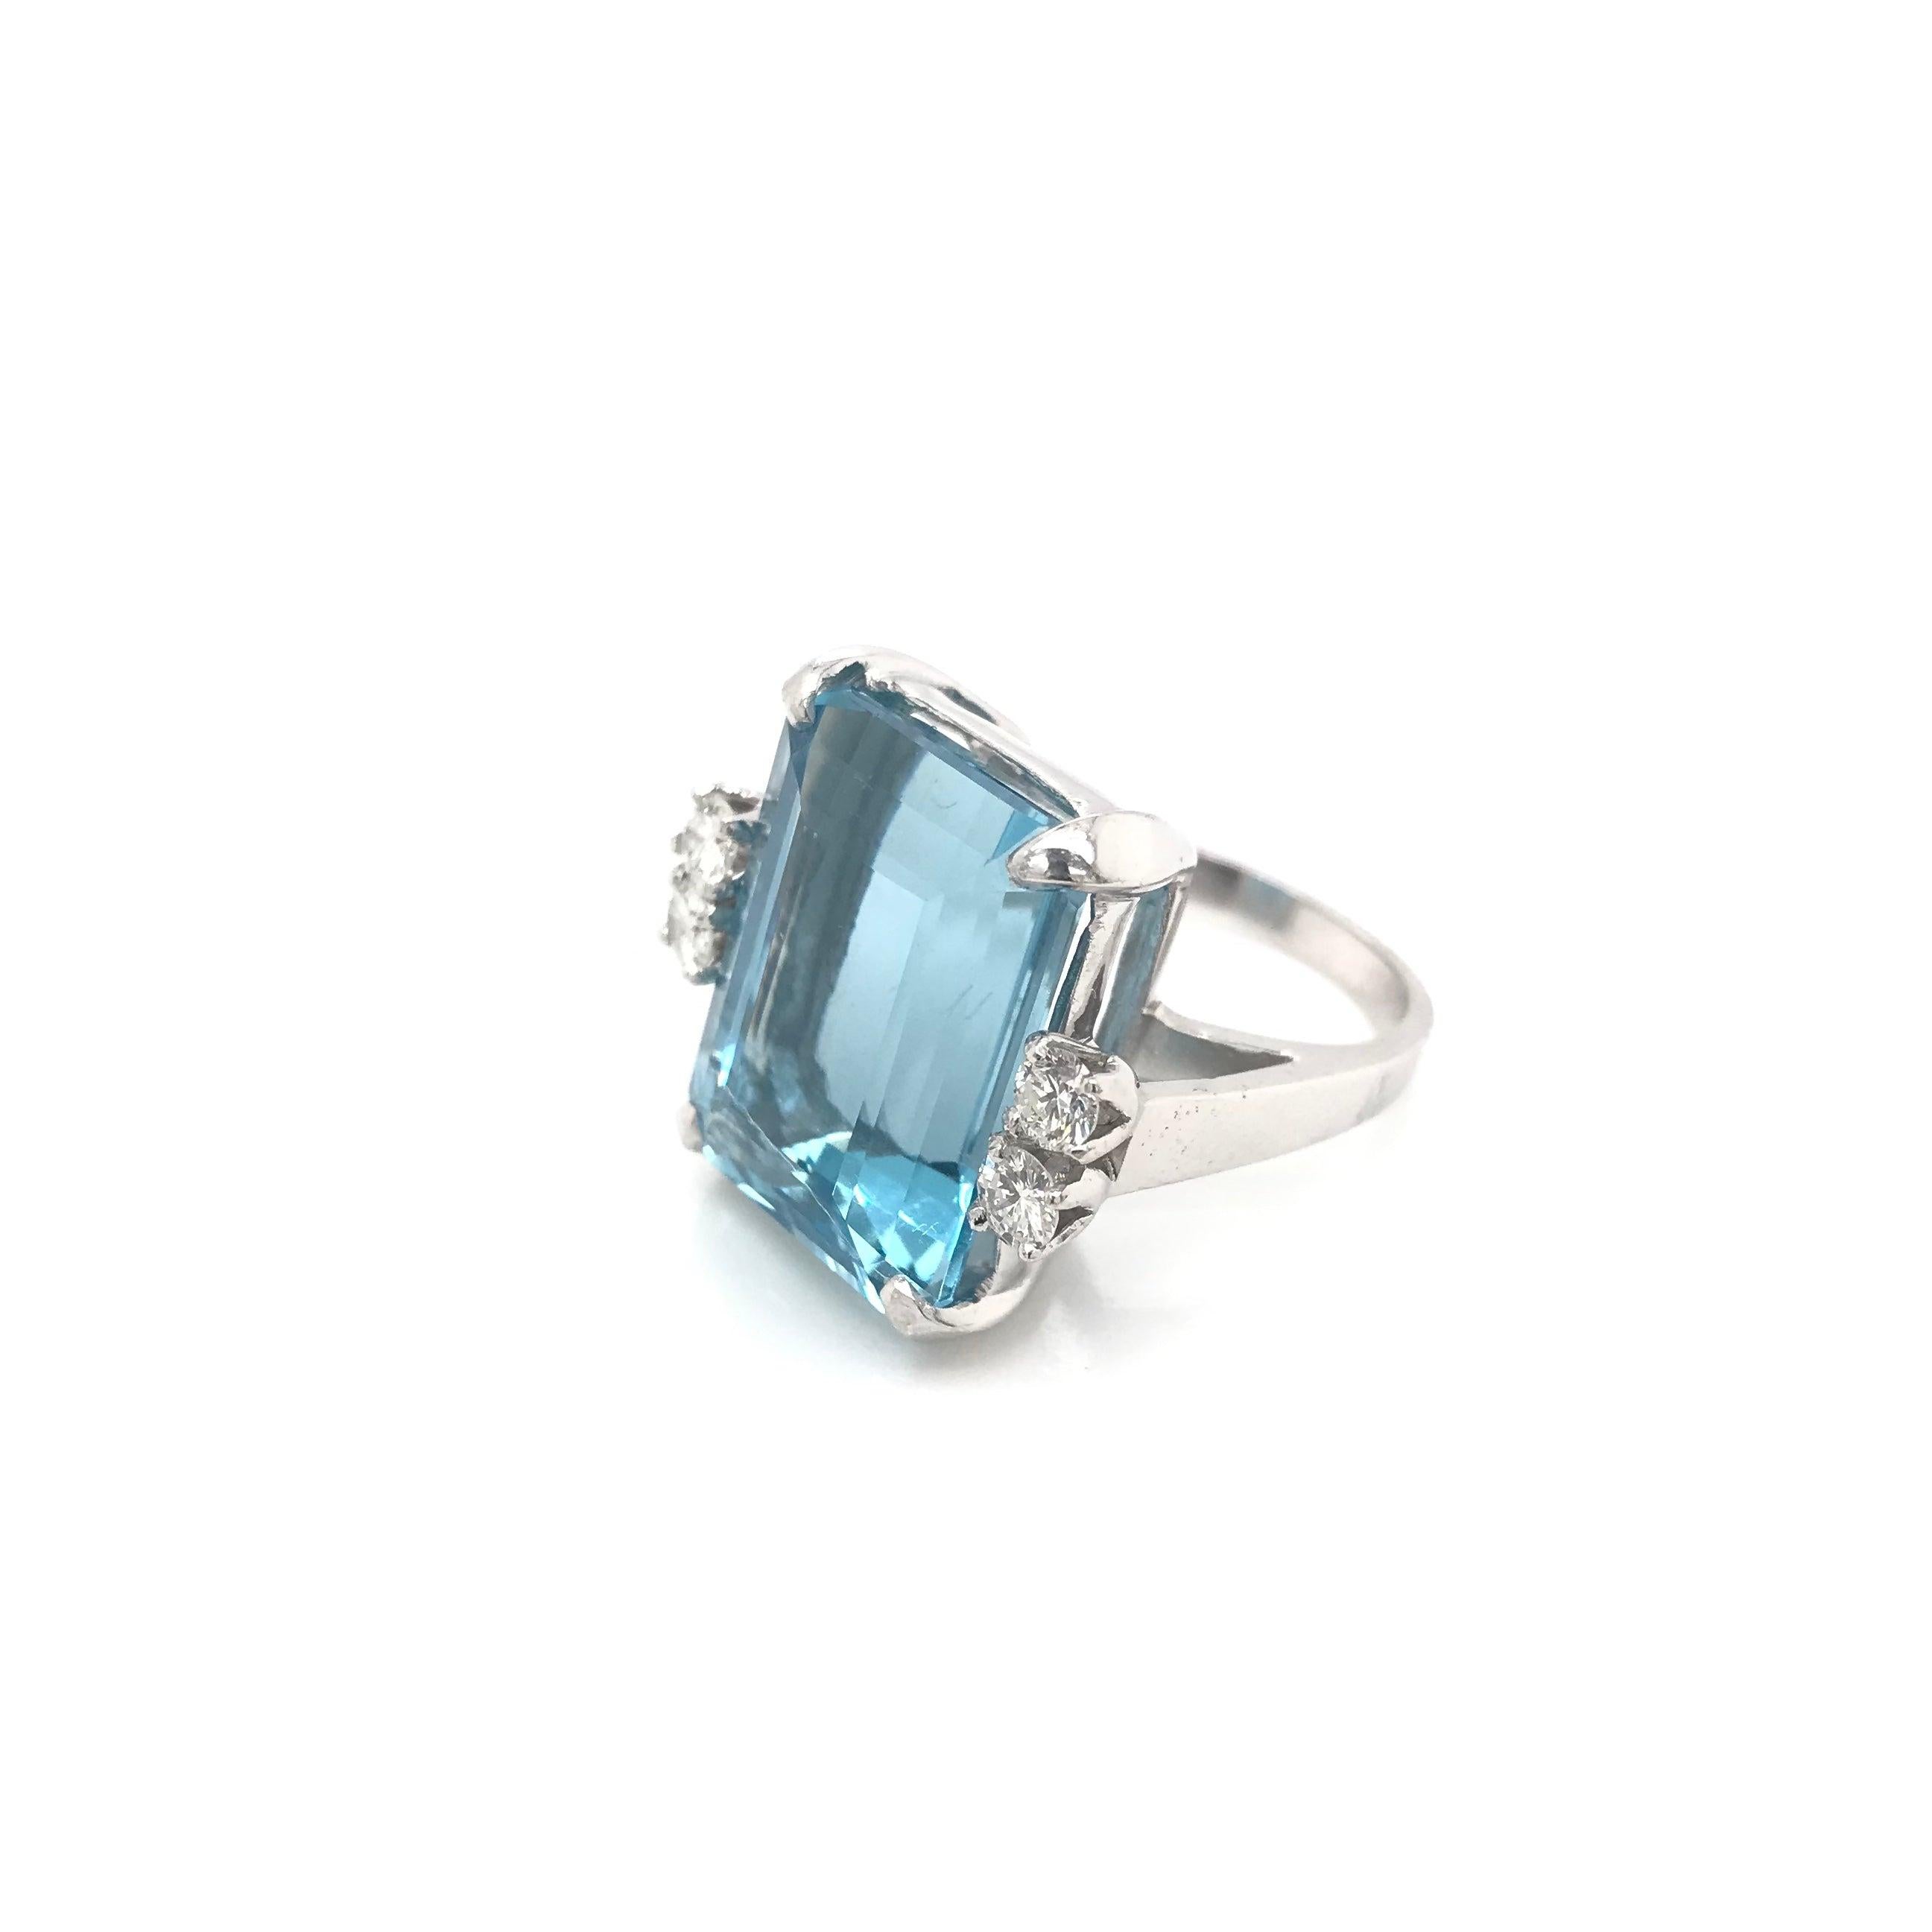 This vintage piece was crafted sometime during the Retro design period (1940-1960). The white gold setting features a large and very beautifully saturated Santa Maria Aquamarine. This stone has been certified by the Gemological Institute of America.